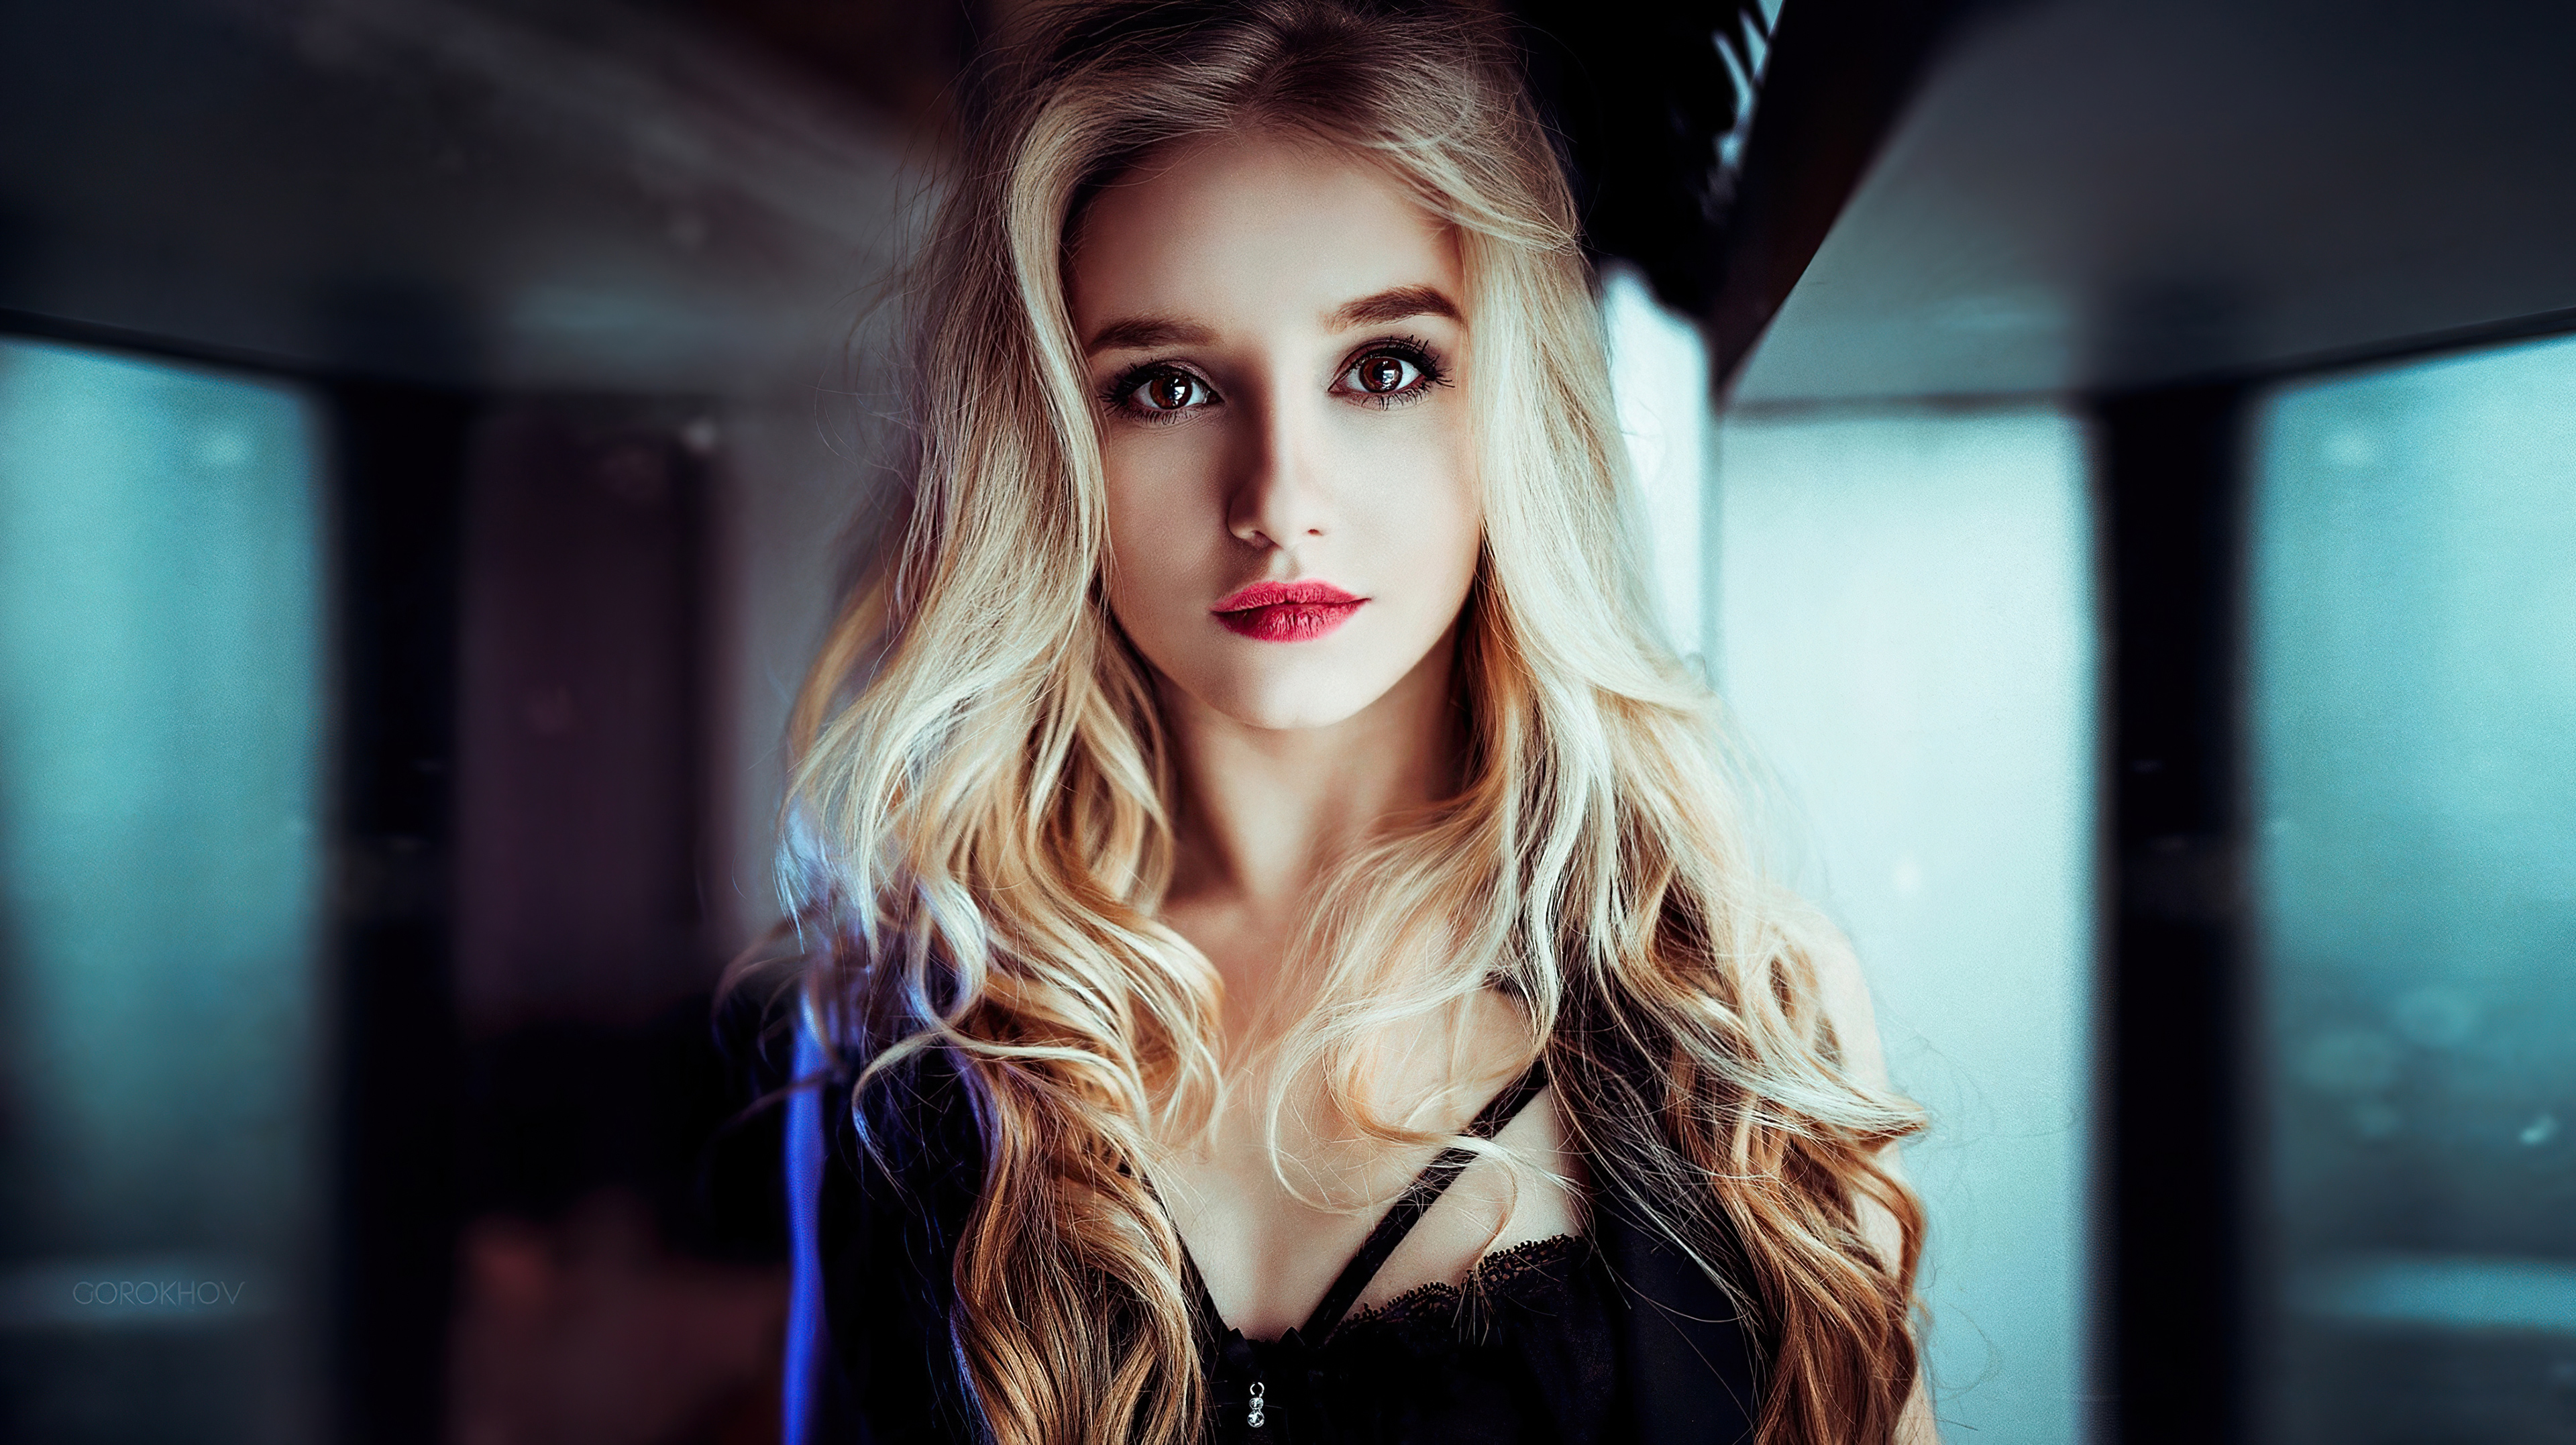 2. Adorable blonde girls with blonde hair - wide 1